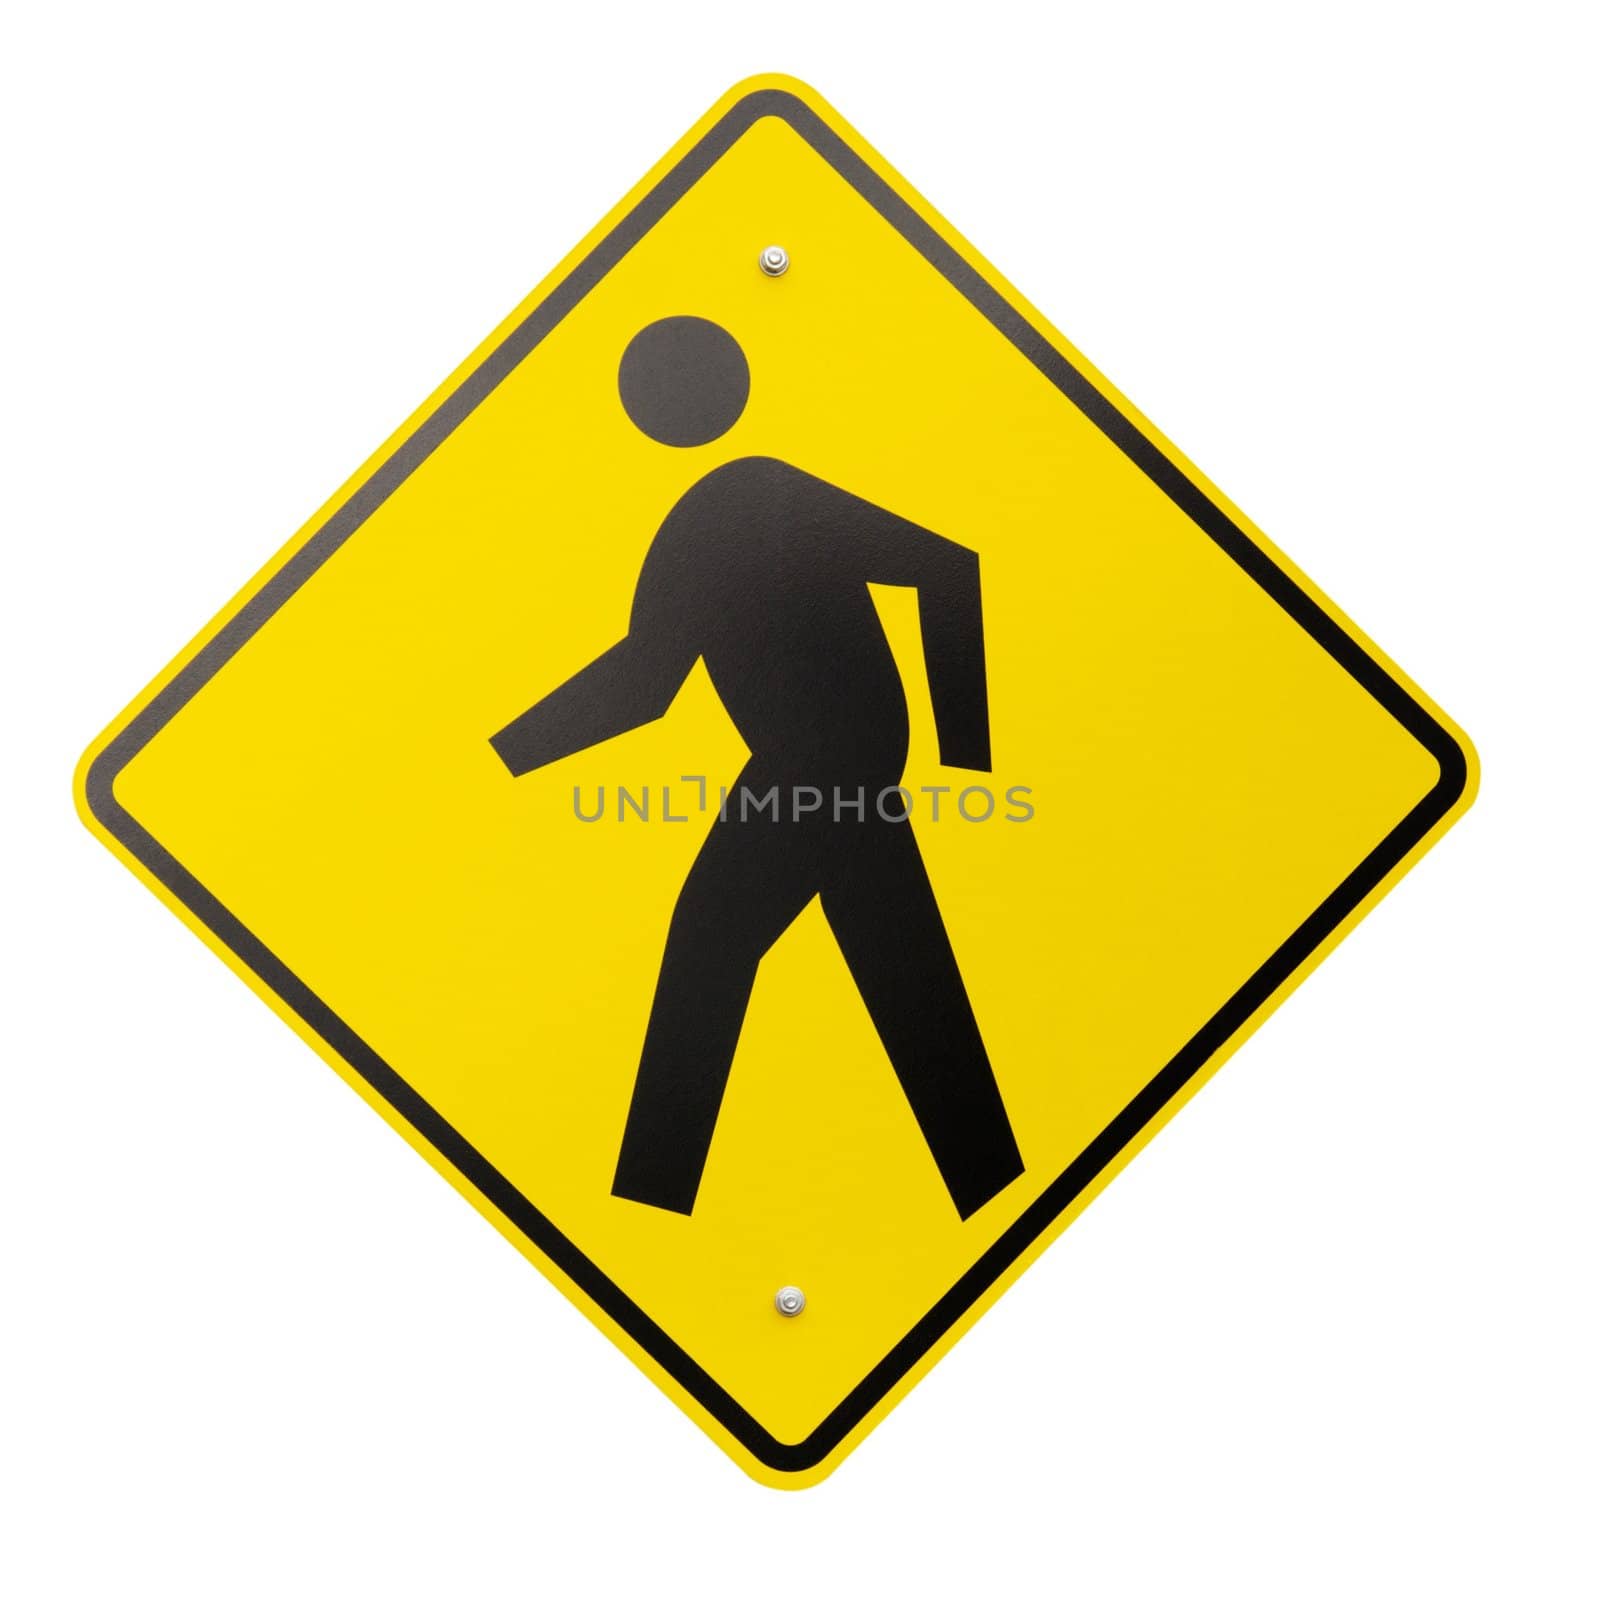 A yellow safety or warning sign for pedestrians walking isolated on a white background